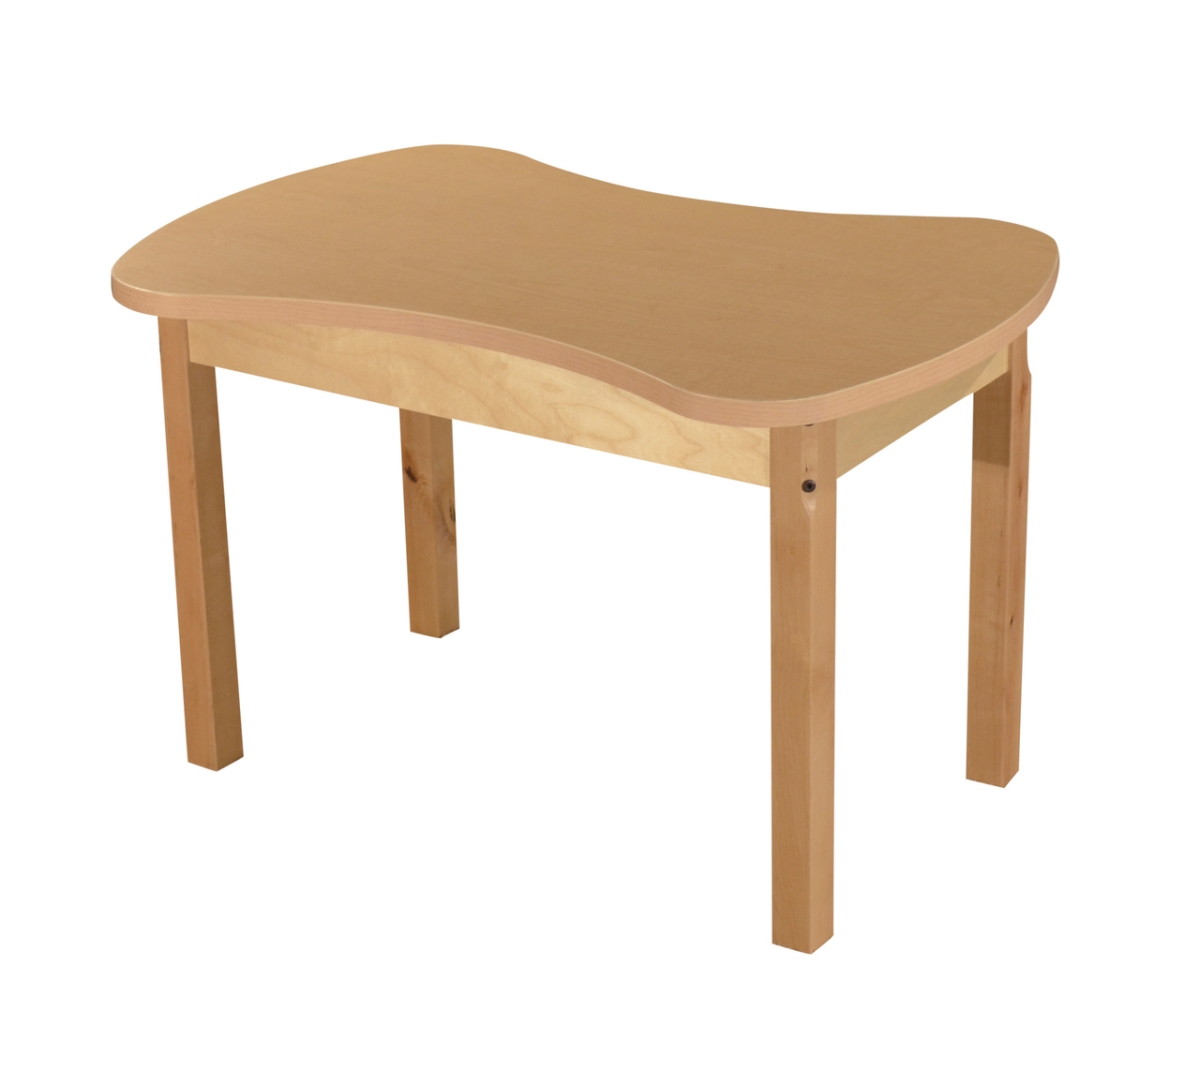 Picture of Wood Designs HPL2436C26 24 x 36 in. Synergy Junction, High Pressure Laminate Table with Hardwood Legs- 26 in.